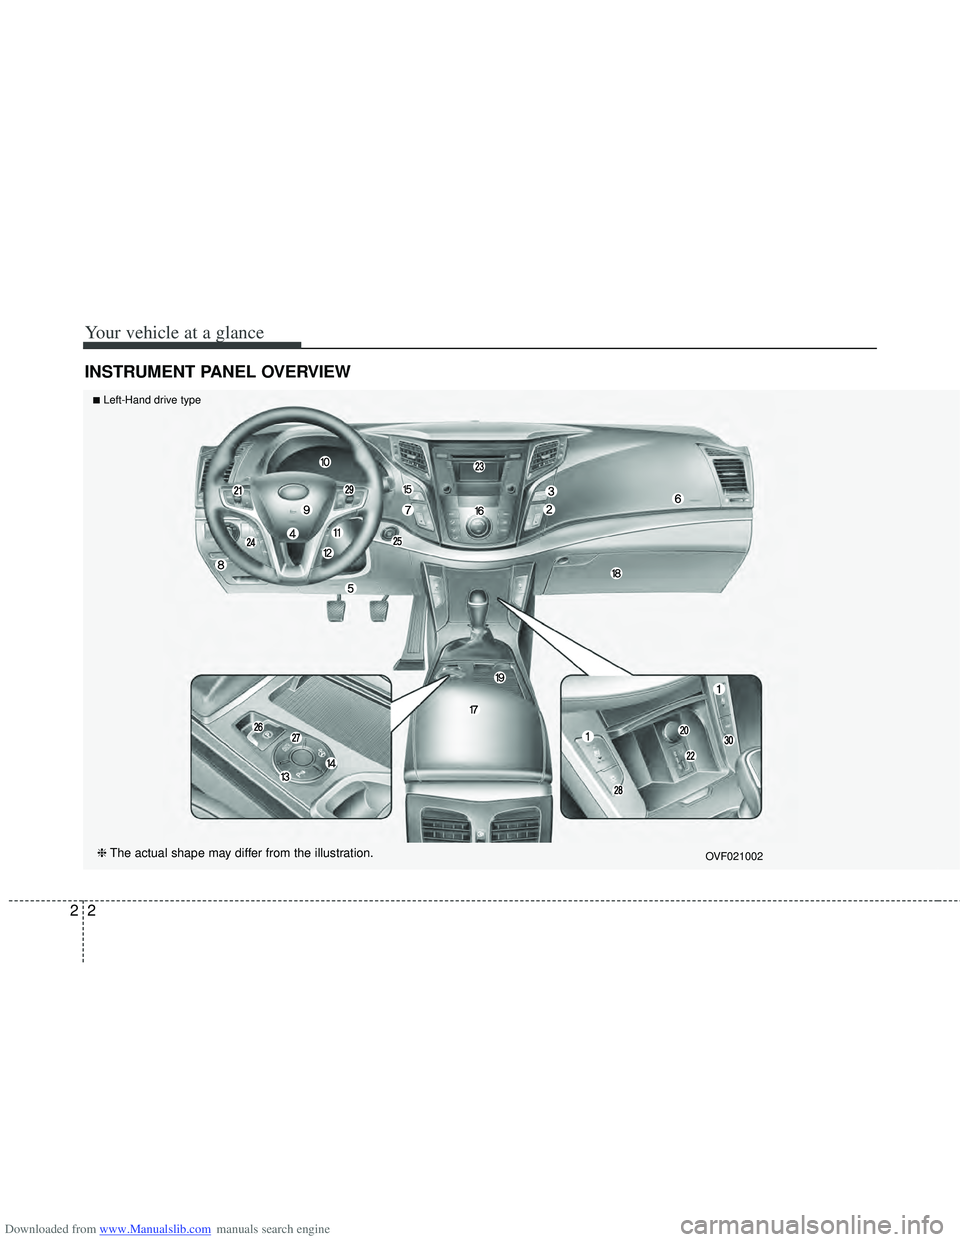 HYUNDAI I40 2014 User Guide Downloaded from www.Manualslib.com manuals search engine Your vehicle at a glance
22
INSTRUMENT PANEL OVERVIEW
■Left-Hand drive type
❈The actual shape may differ from the illustration.OVF021002  